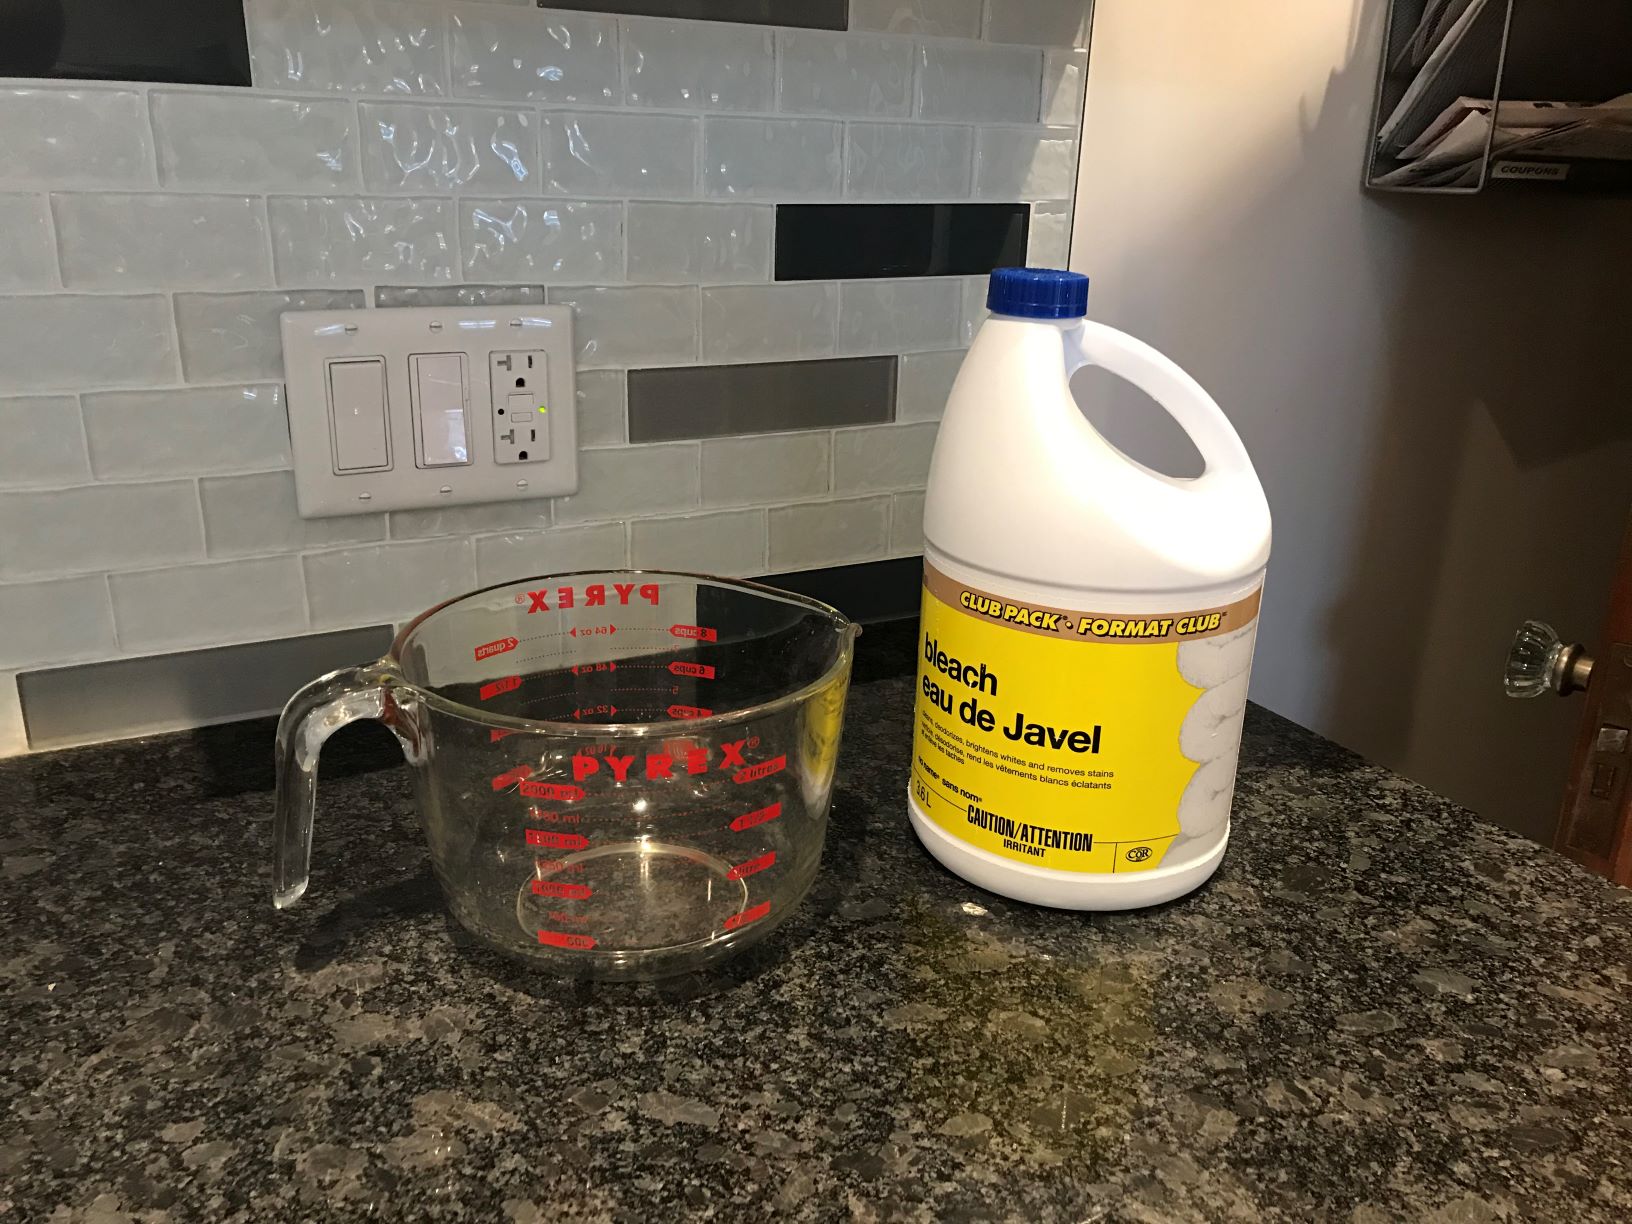 A glass measuring cup and a bottle of bleach sitting on a countertop.